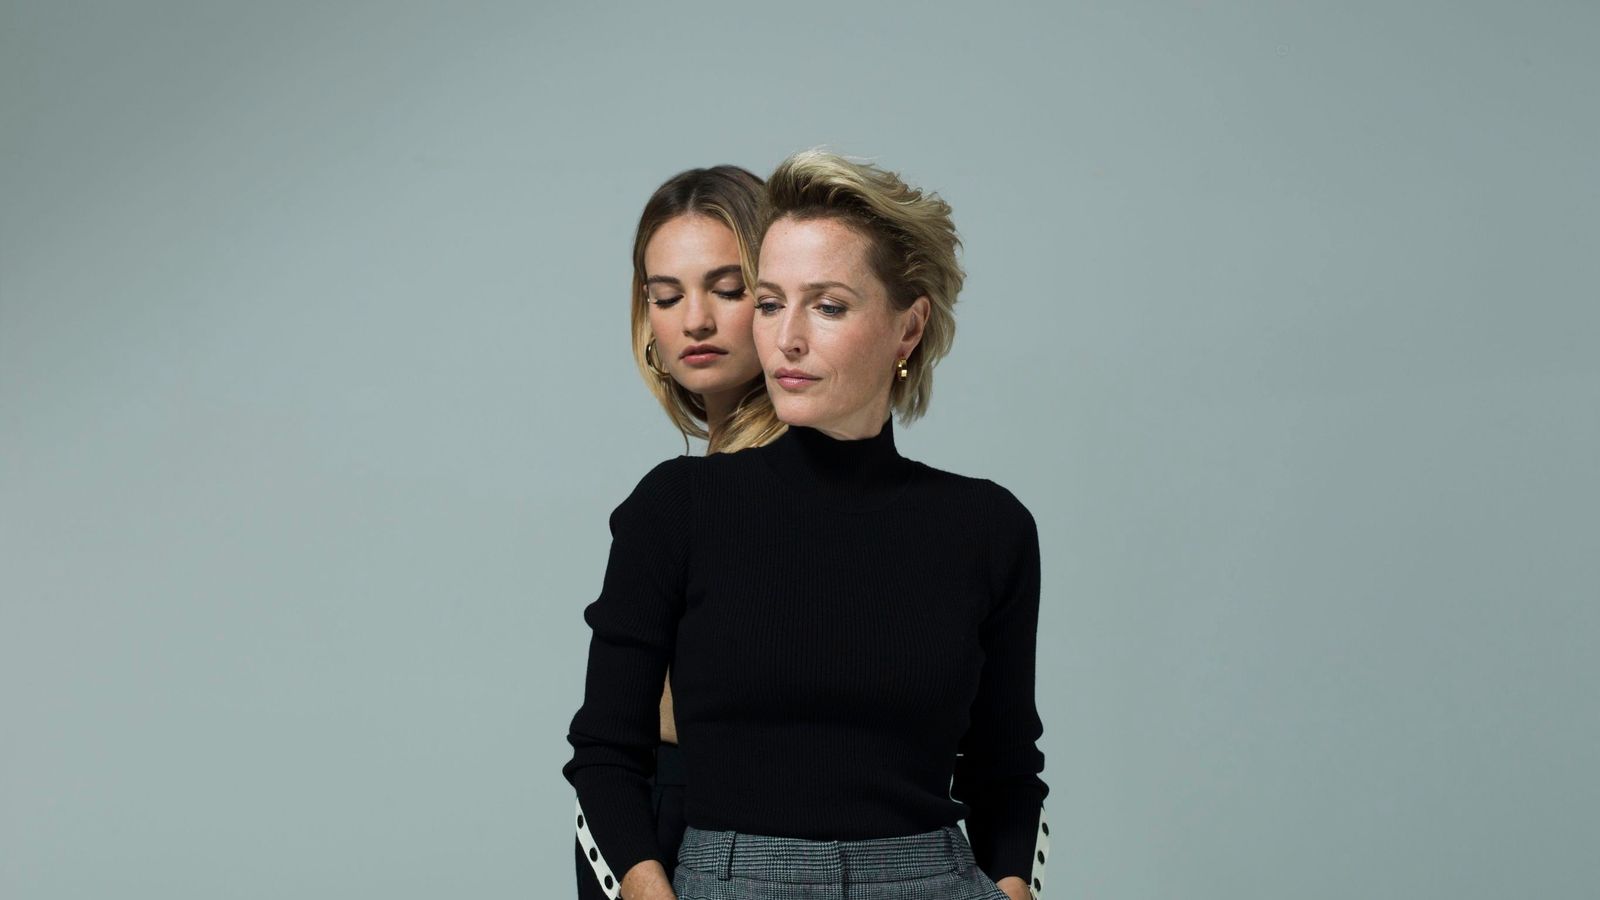 All About Eve Gillian Anderson And Lily James To Star In